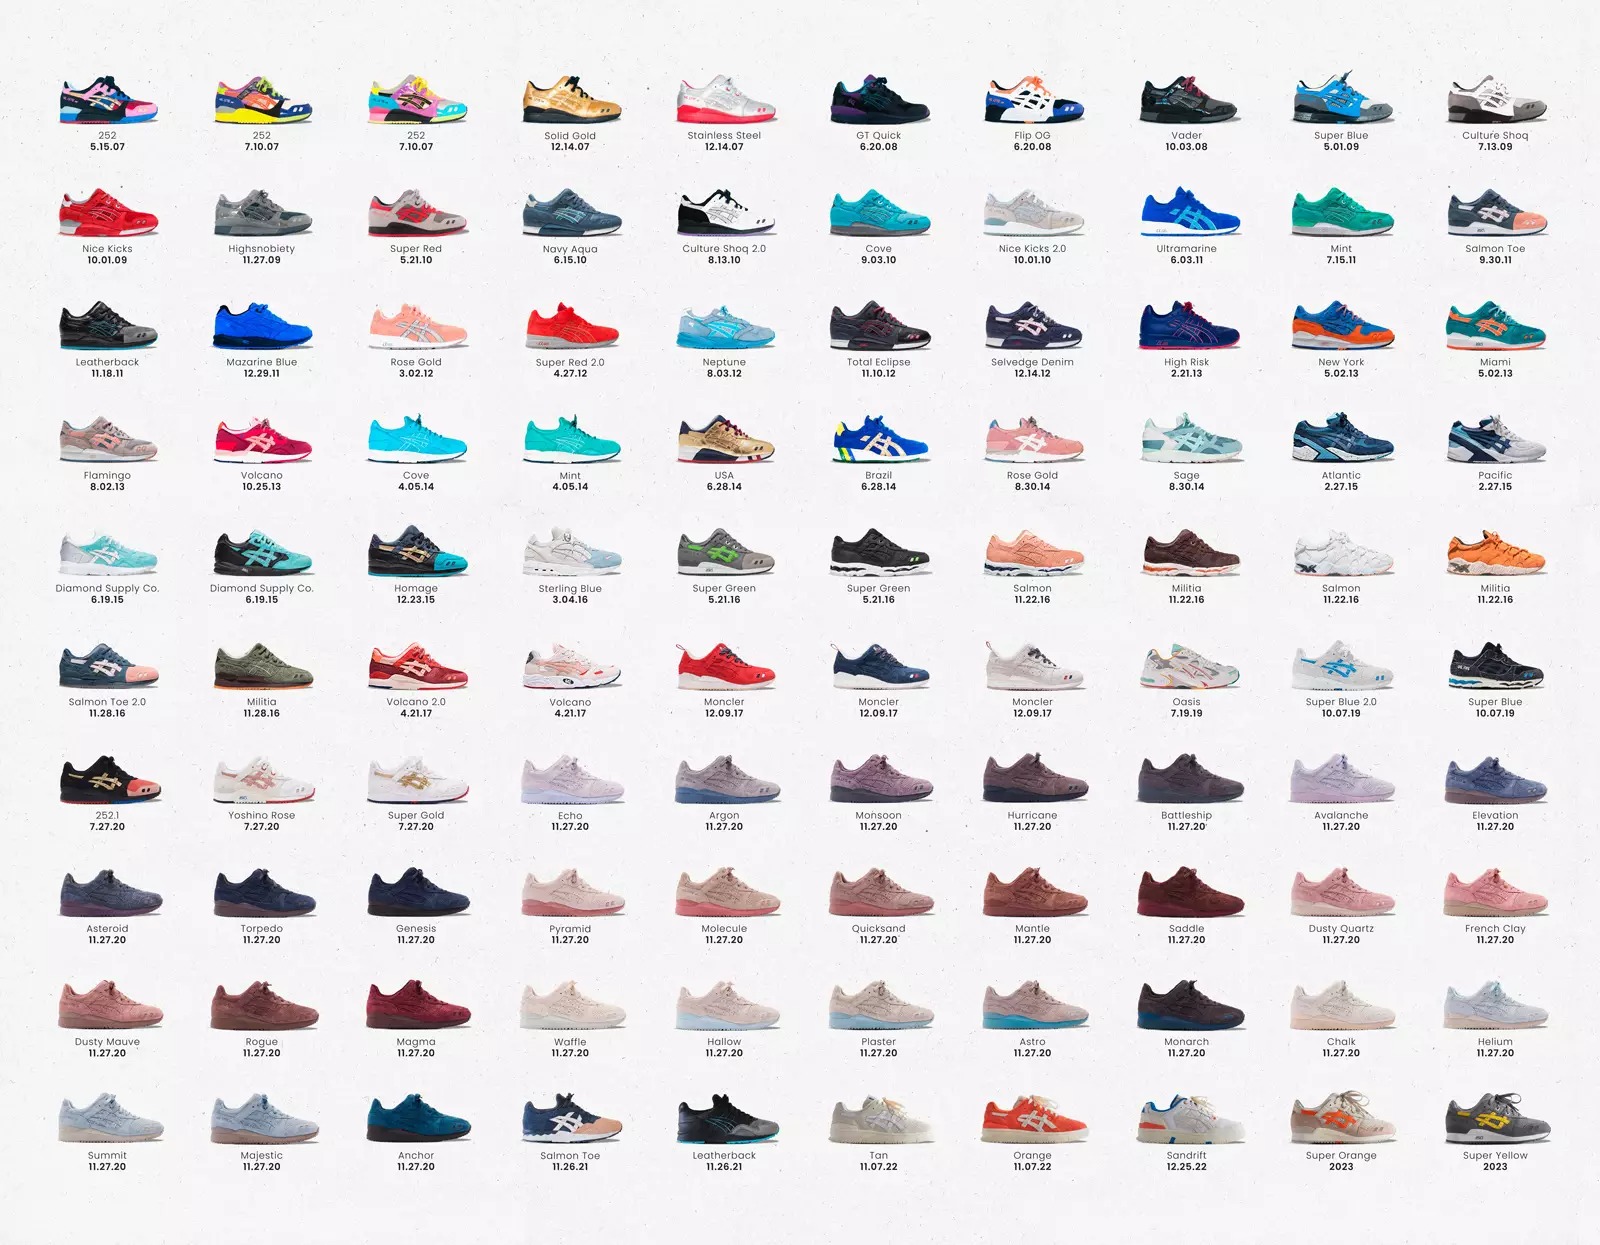 100 PAIRS OF ASICS LATER, GUEST EDITOR RONNIE FIEG REFLECTS ON A FOOTWEAR LEGACY